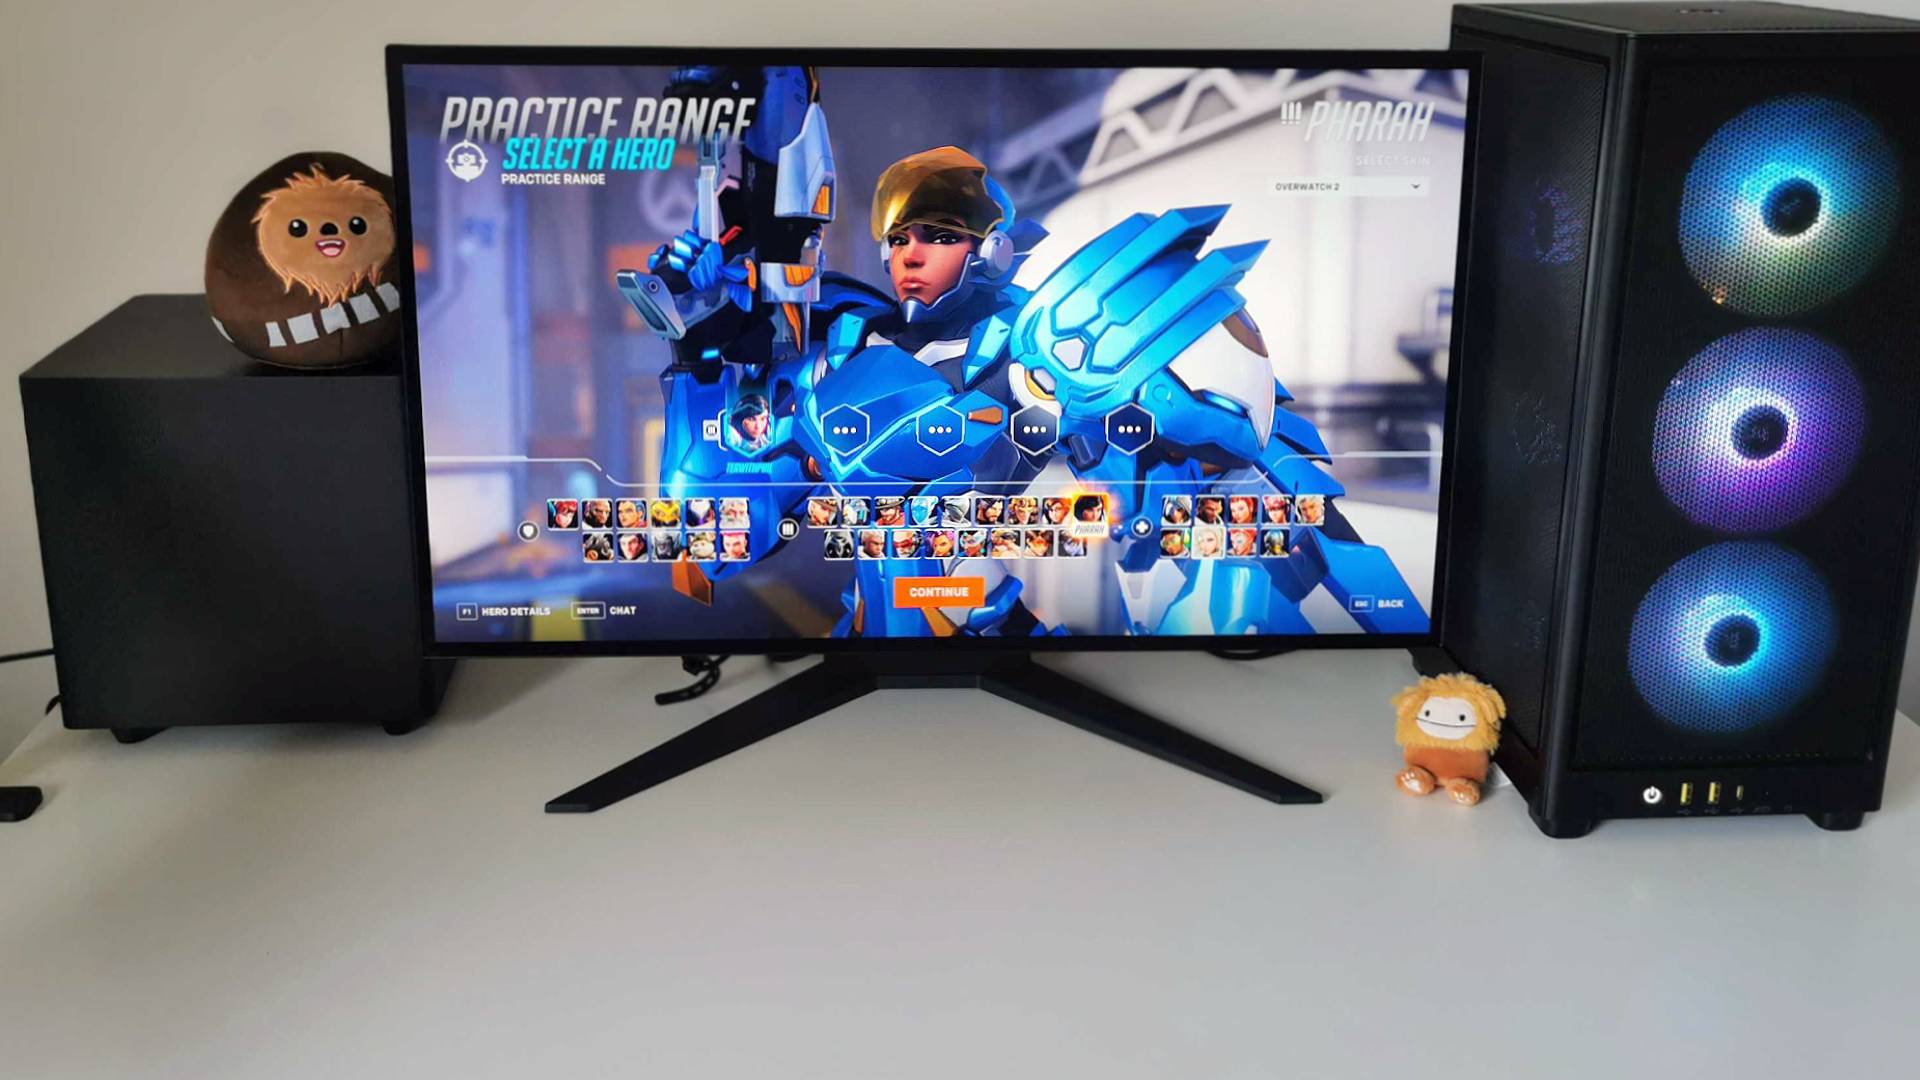 Corsair Xeneon 27QHD240 gaming monitor with Farah from Overwatch 2 on screen